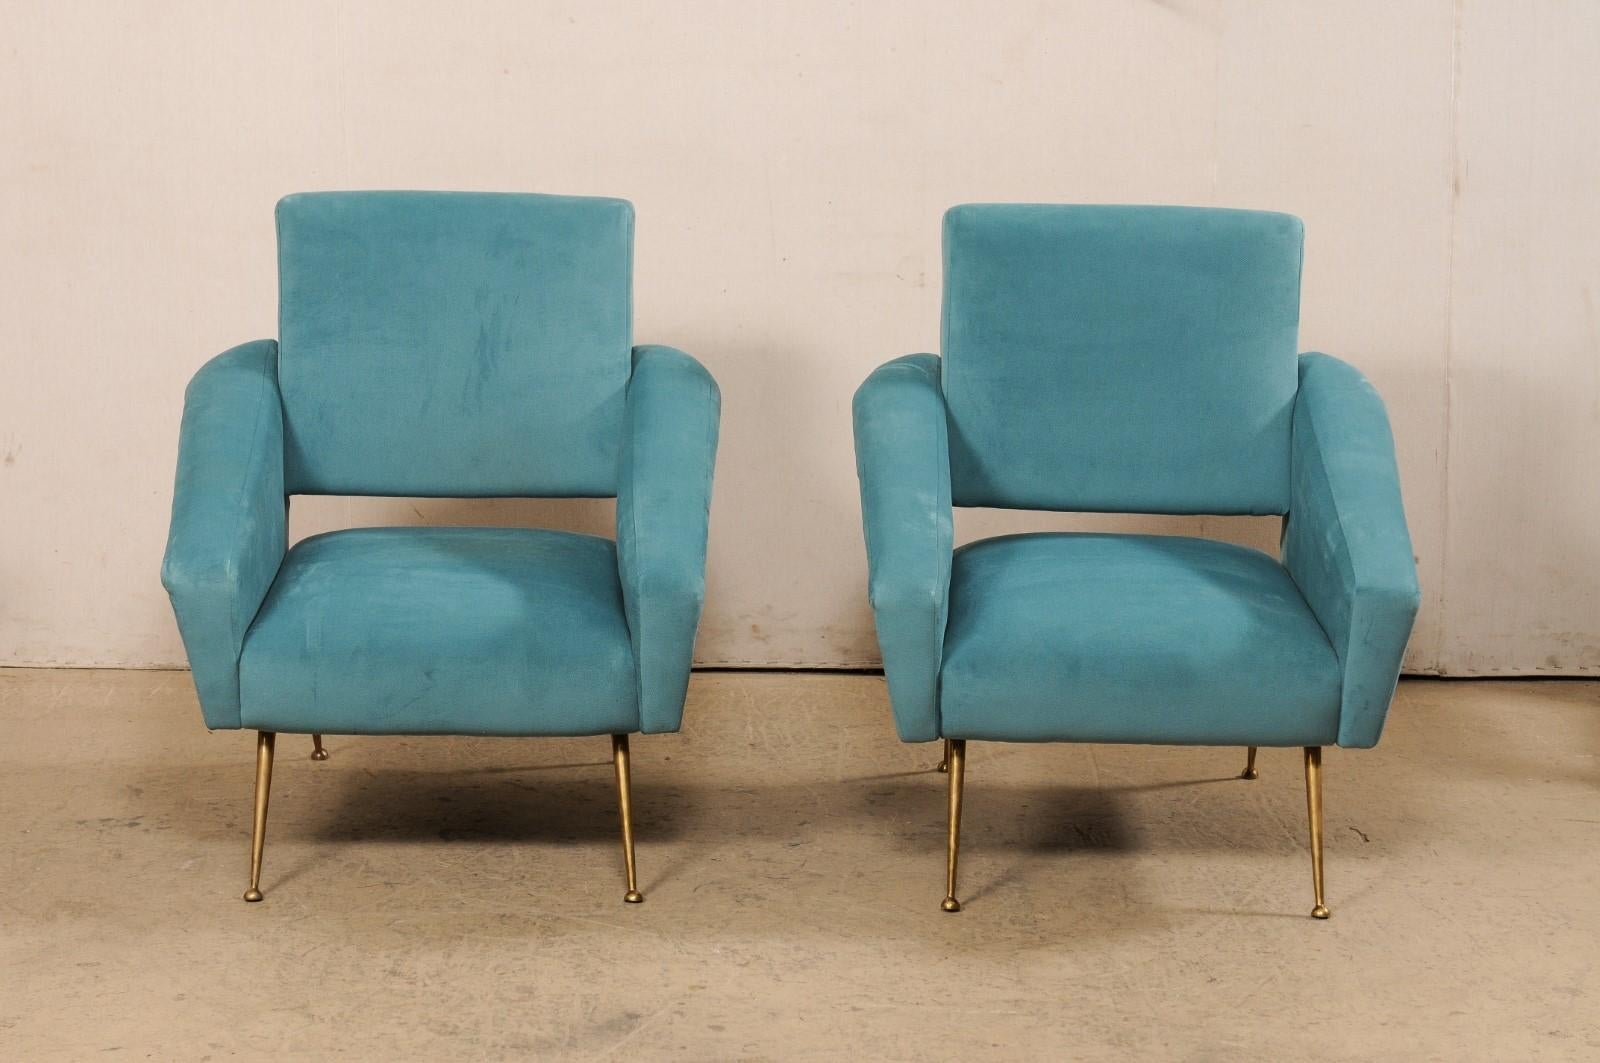 20th Century Italian Pair of Mid-Century Modern Upholstered Club Chairs For Sale